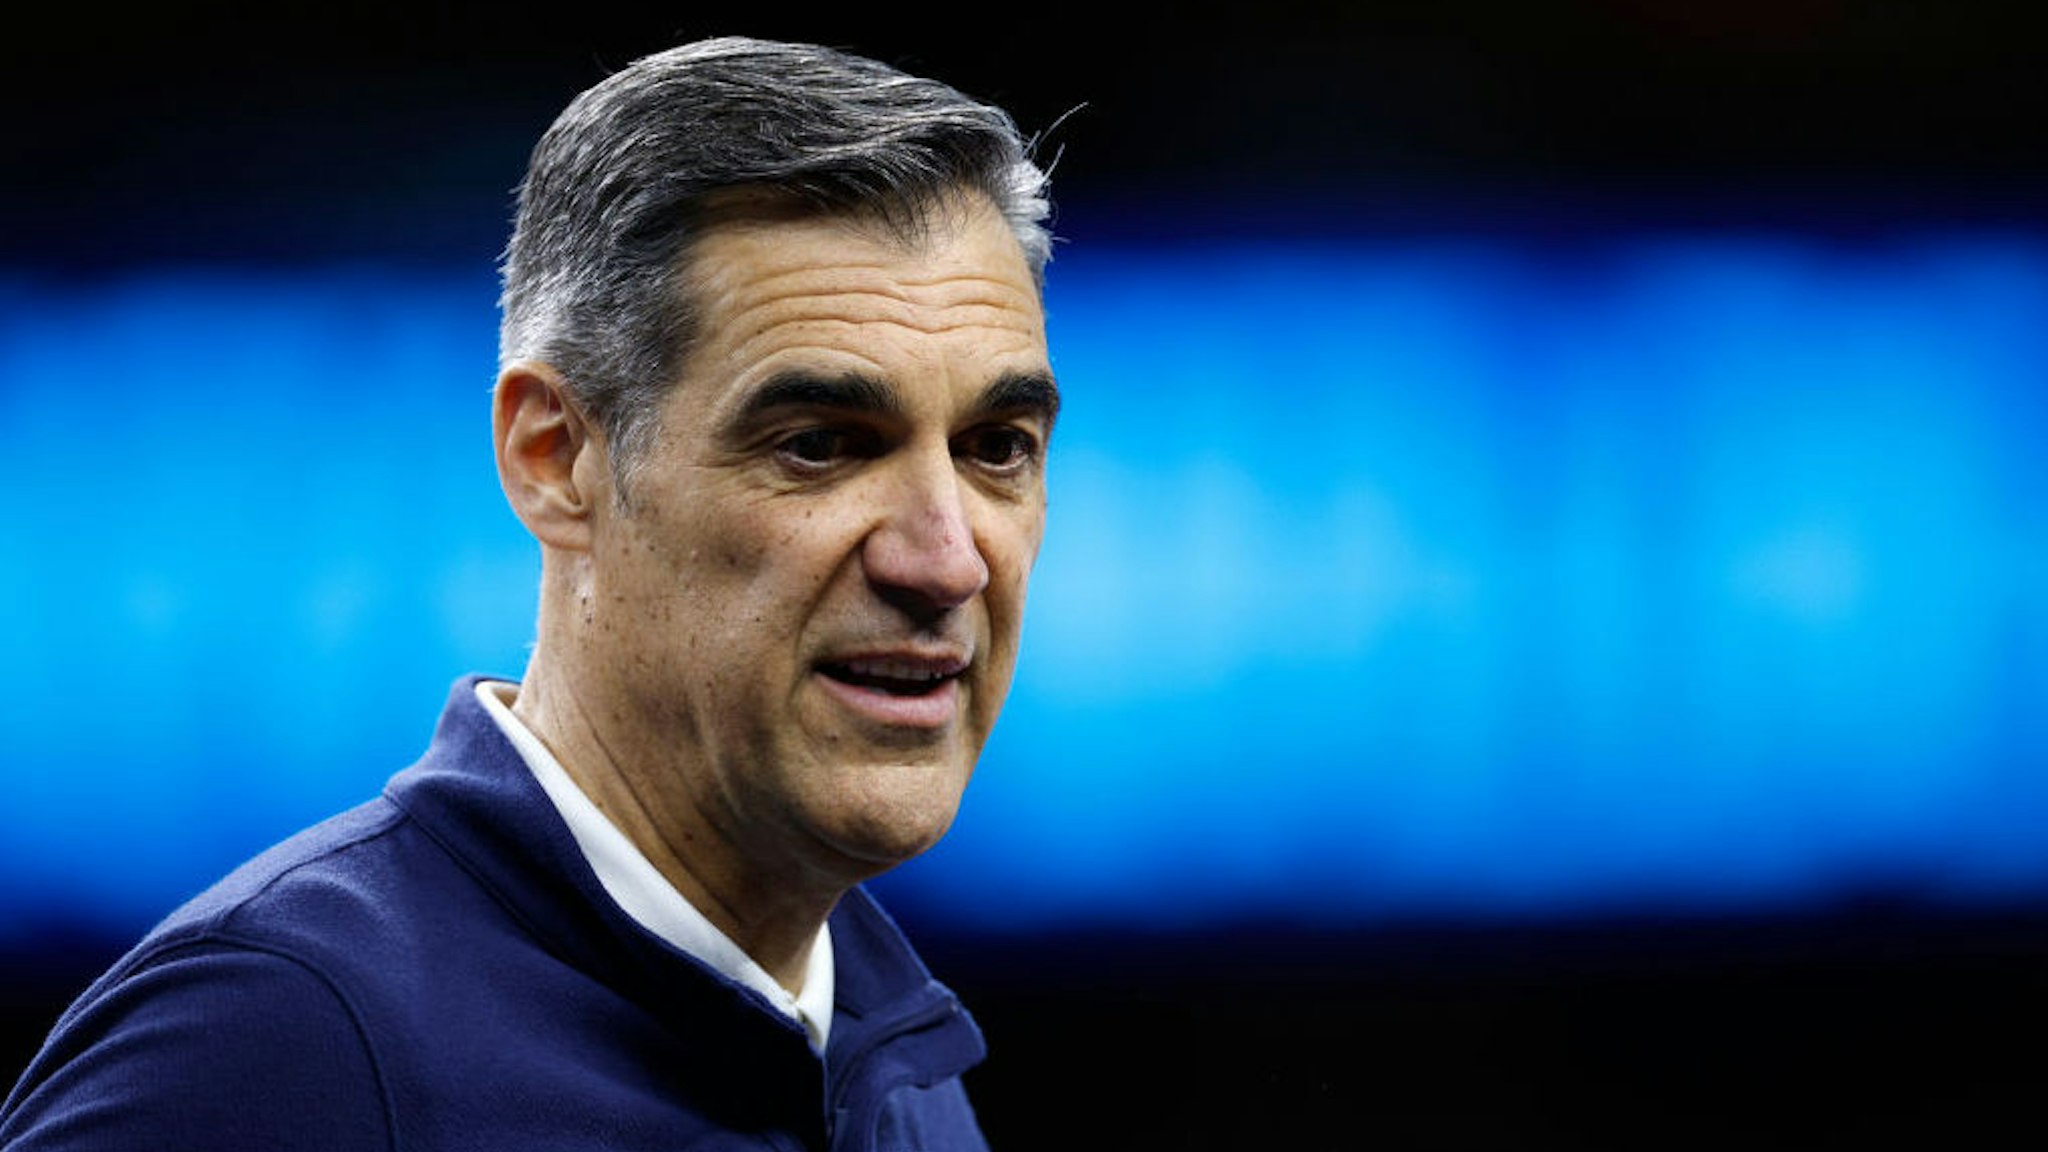 NEW ORLEANS, LOUISIANA - APRIL 01: Head coach Jay Wright of the Villanova Wildcats looks on during practice before the 2022 Men's Basketball Tournament Final Four at Caesars Superdome on April 01, 2022 in New Orleans, Louisiana. (Photo by Chris Graythen/Getty Images)